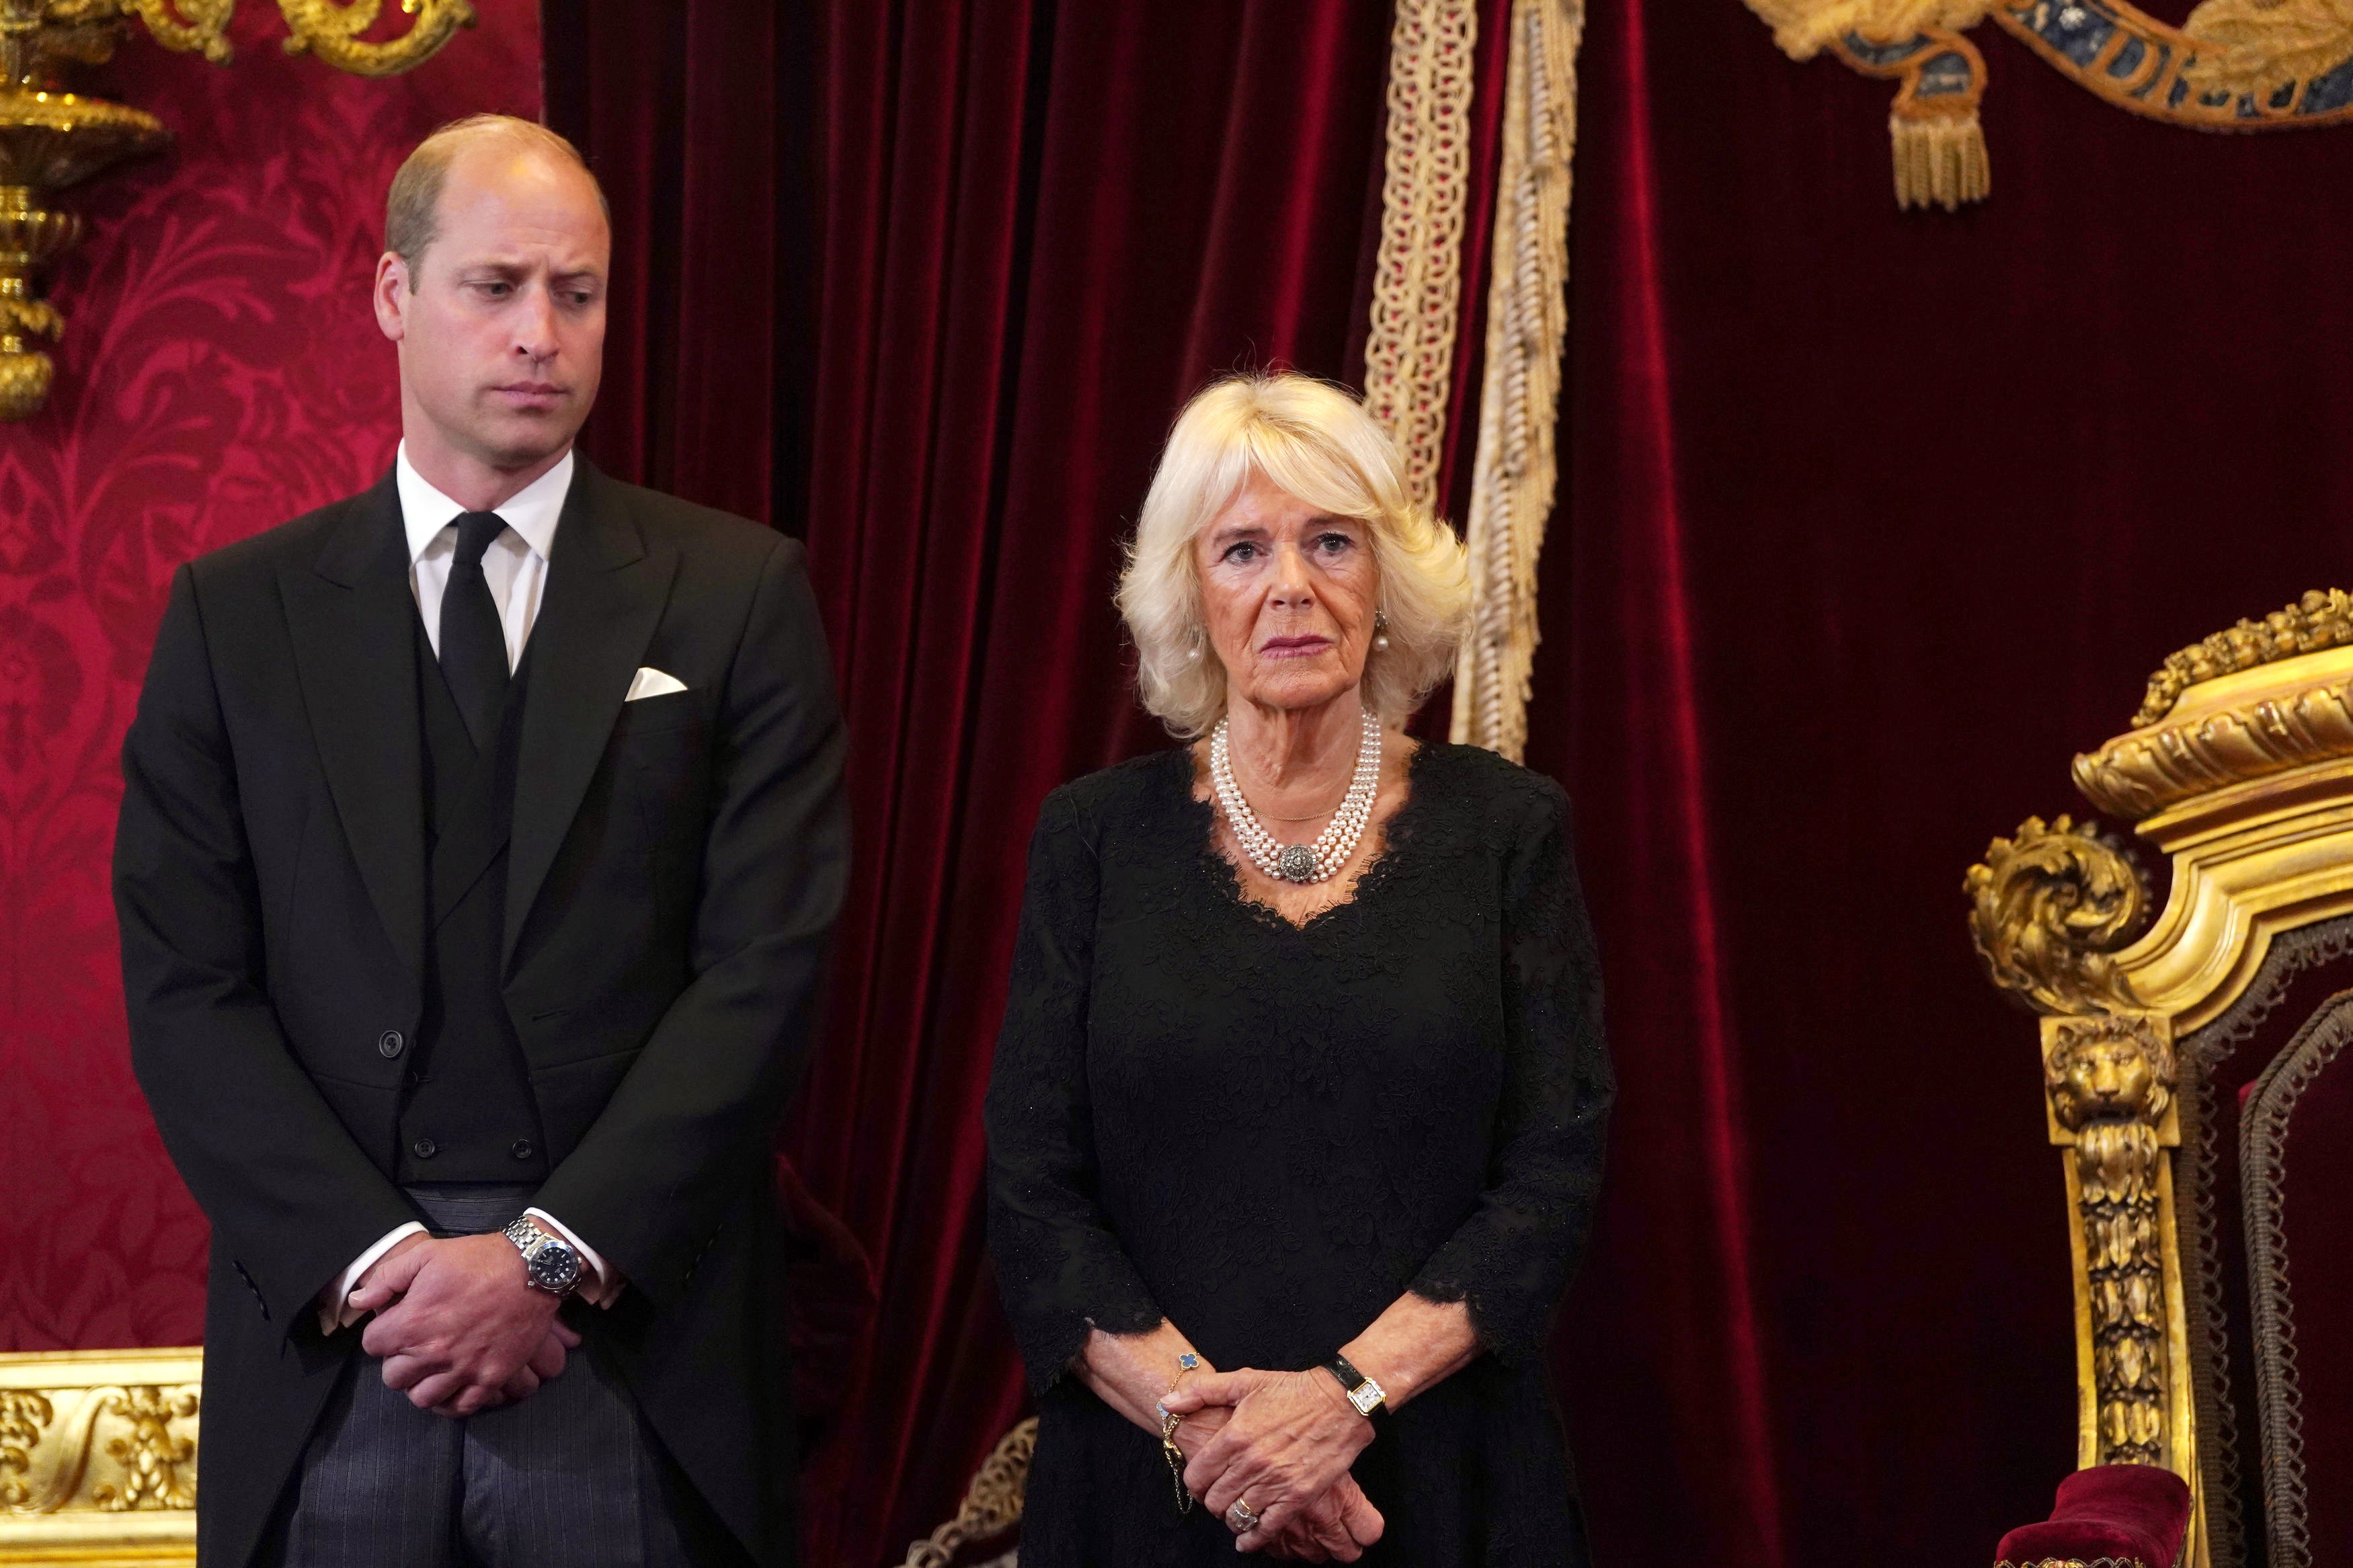 Prince William and Queen Consort Camilla in London 2022. | Source: Getty Images